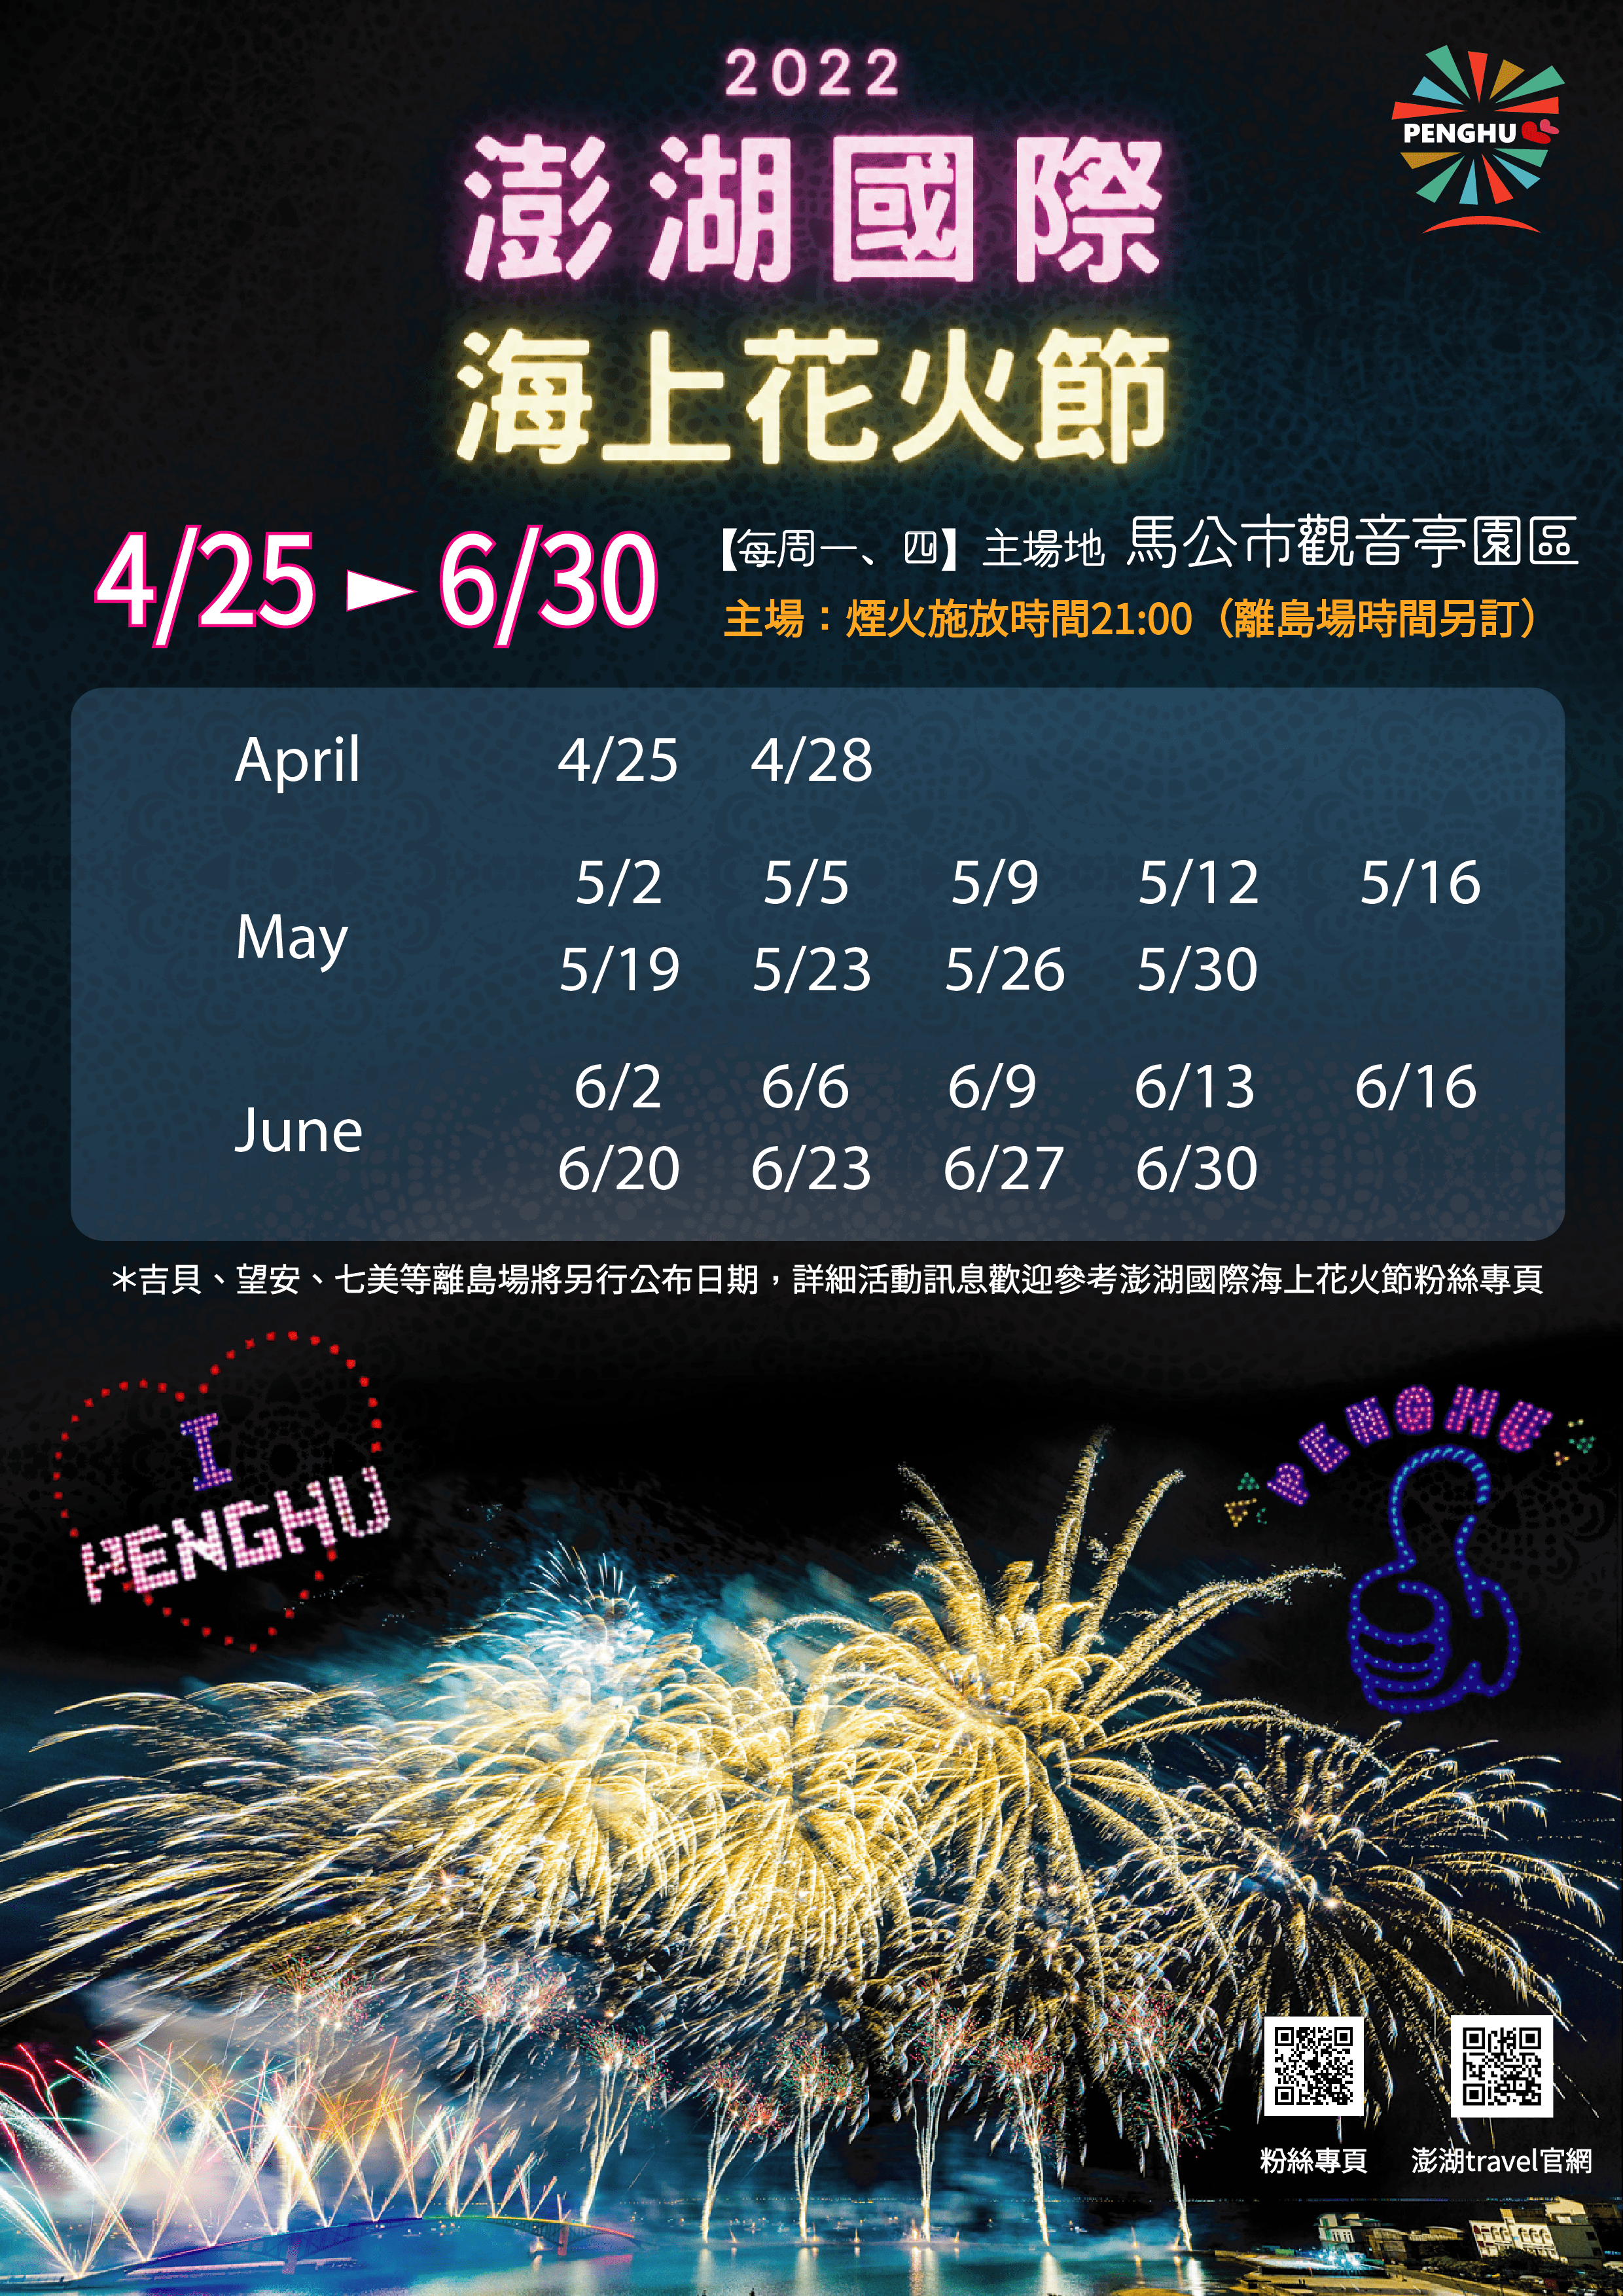 The fireworks extravaganza will start from 25 April. (Photo / Provided by Penghu County Government)